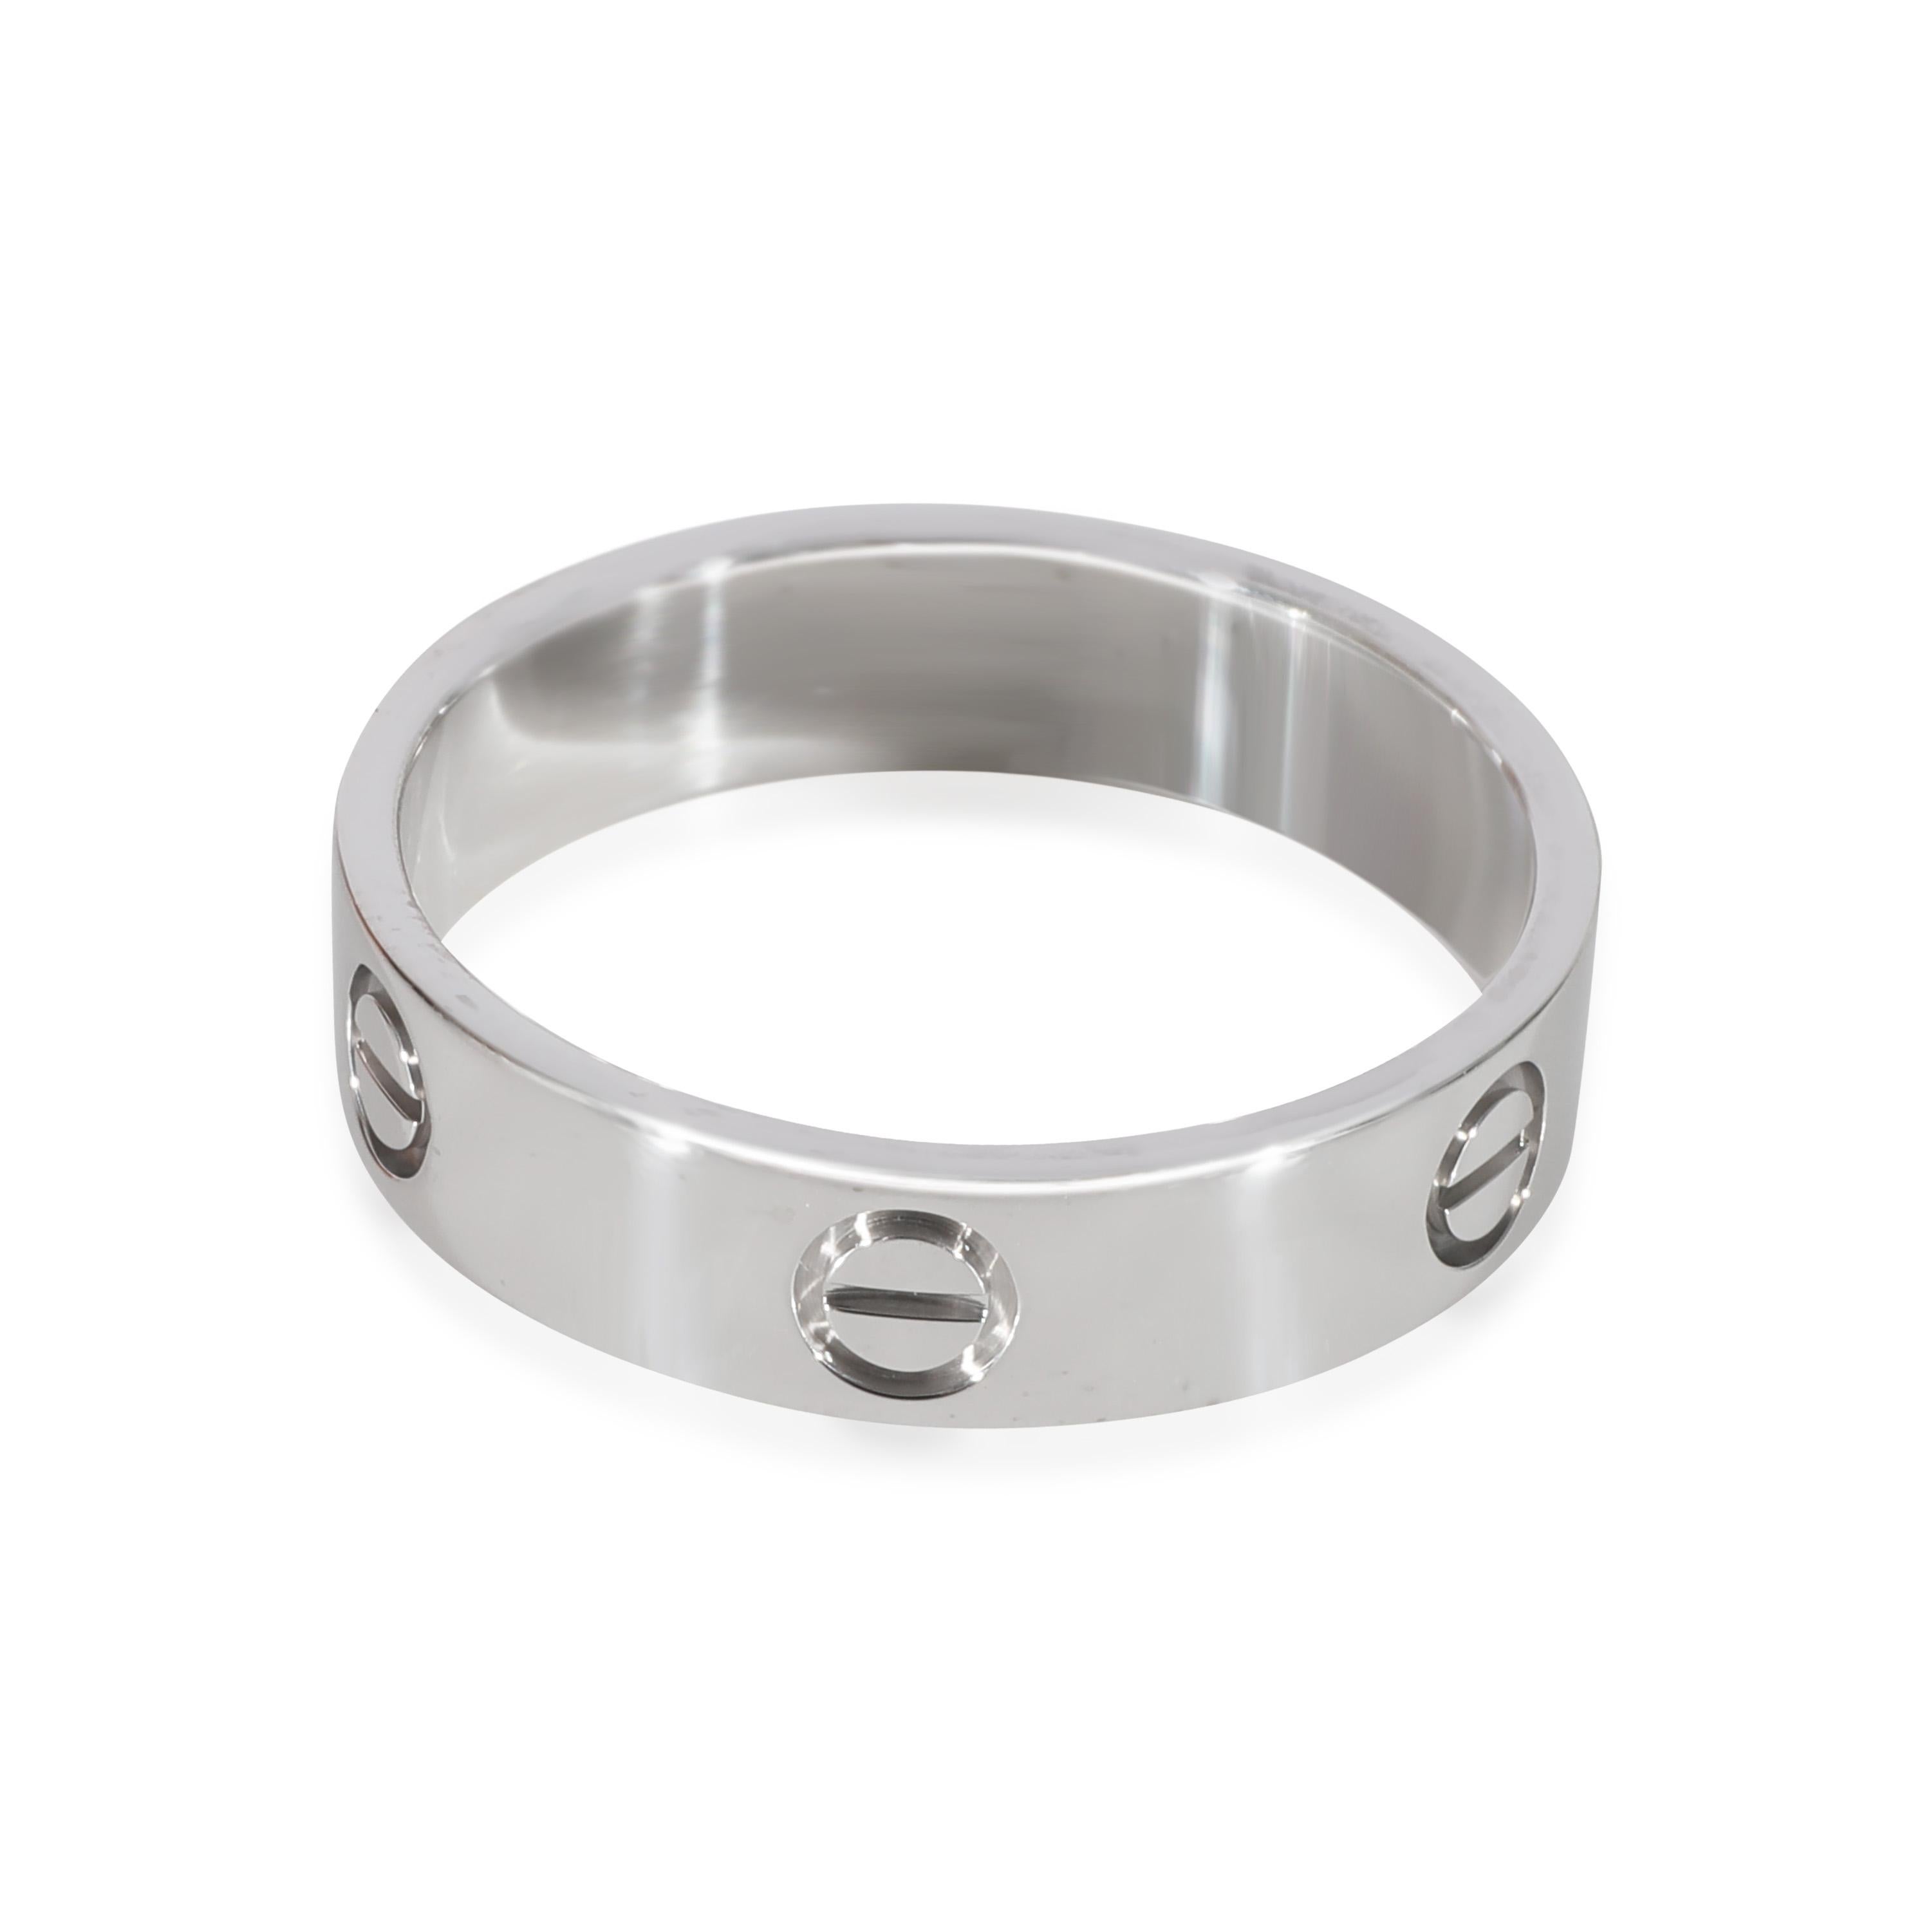 Cartier Love Ring in 18k White Gold

PRIMARY DETAILS
SKU: 129302
Listing Title: Cartier Love Ring in 18k White Gold
Condition Description: Cartier's Love collection is the epitome of iconic, from the recognizable designs to the history behind the